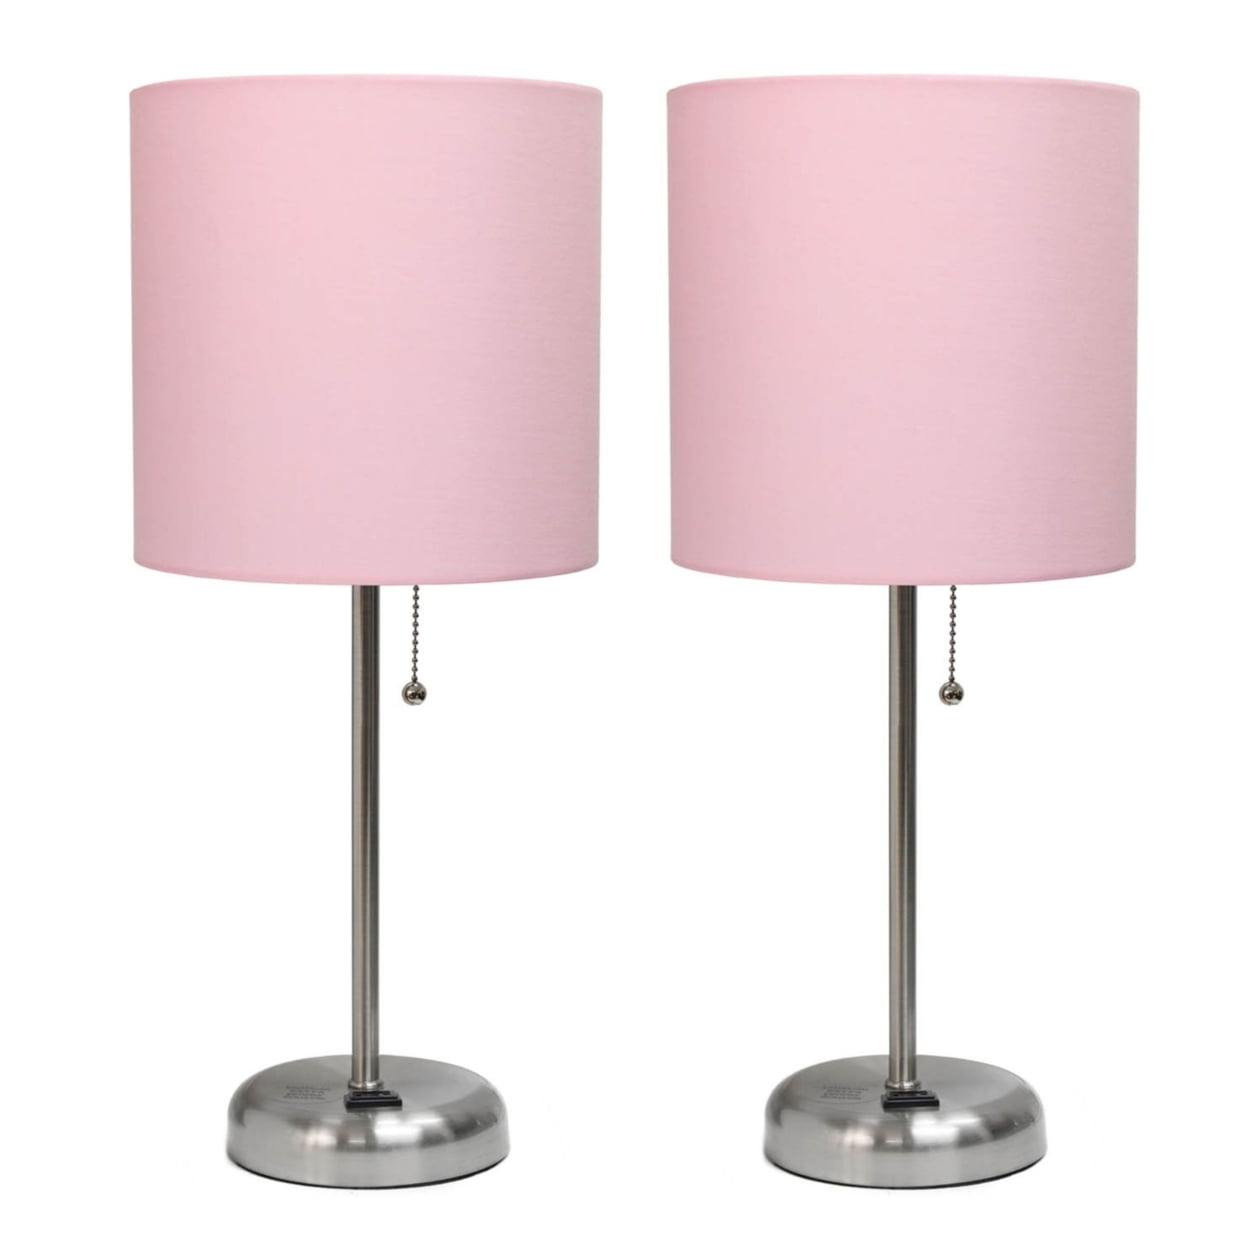 Lc2001-lpk-2pk Brushed Steel Stick Table Lamp With Charging Outlet & Fabric Shade, Light Pink - Set Of 2